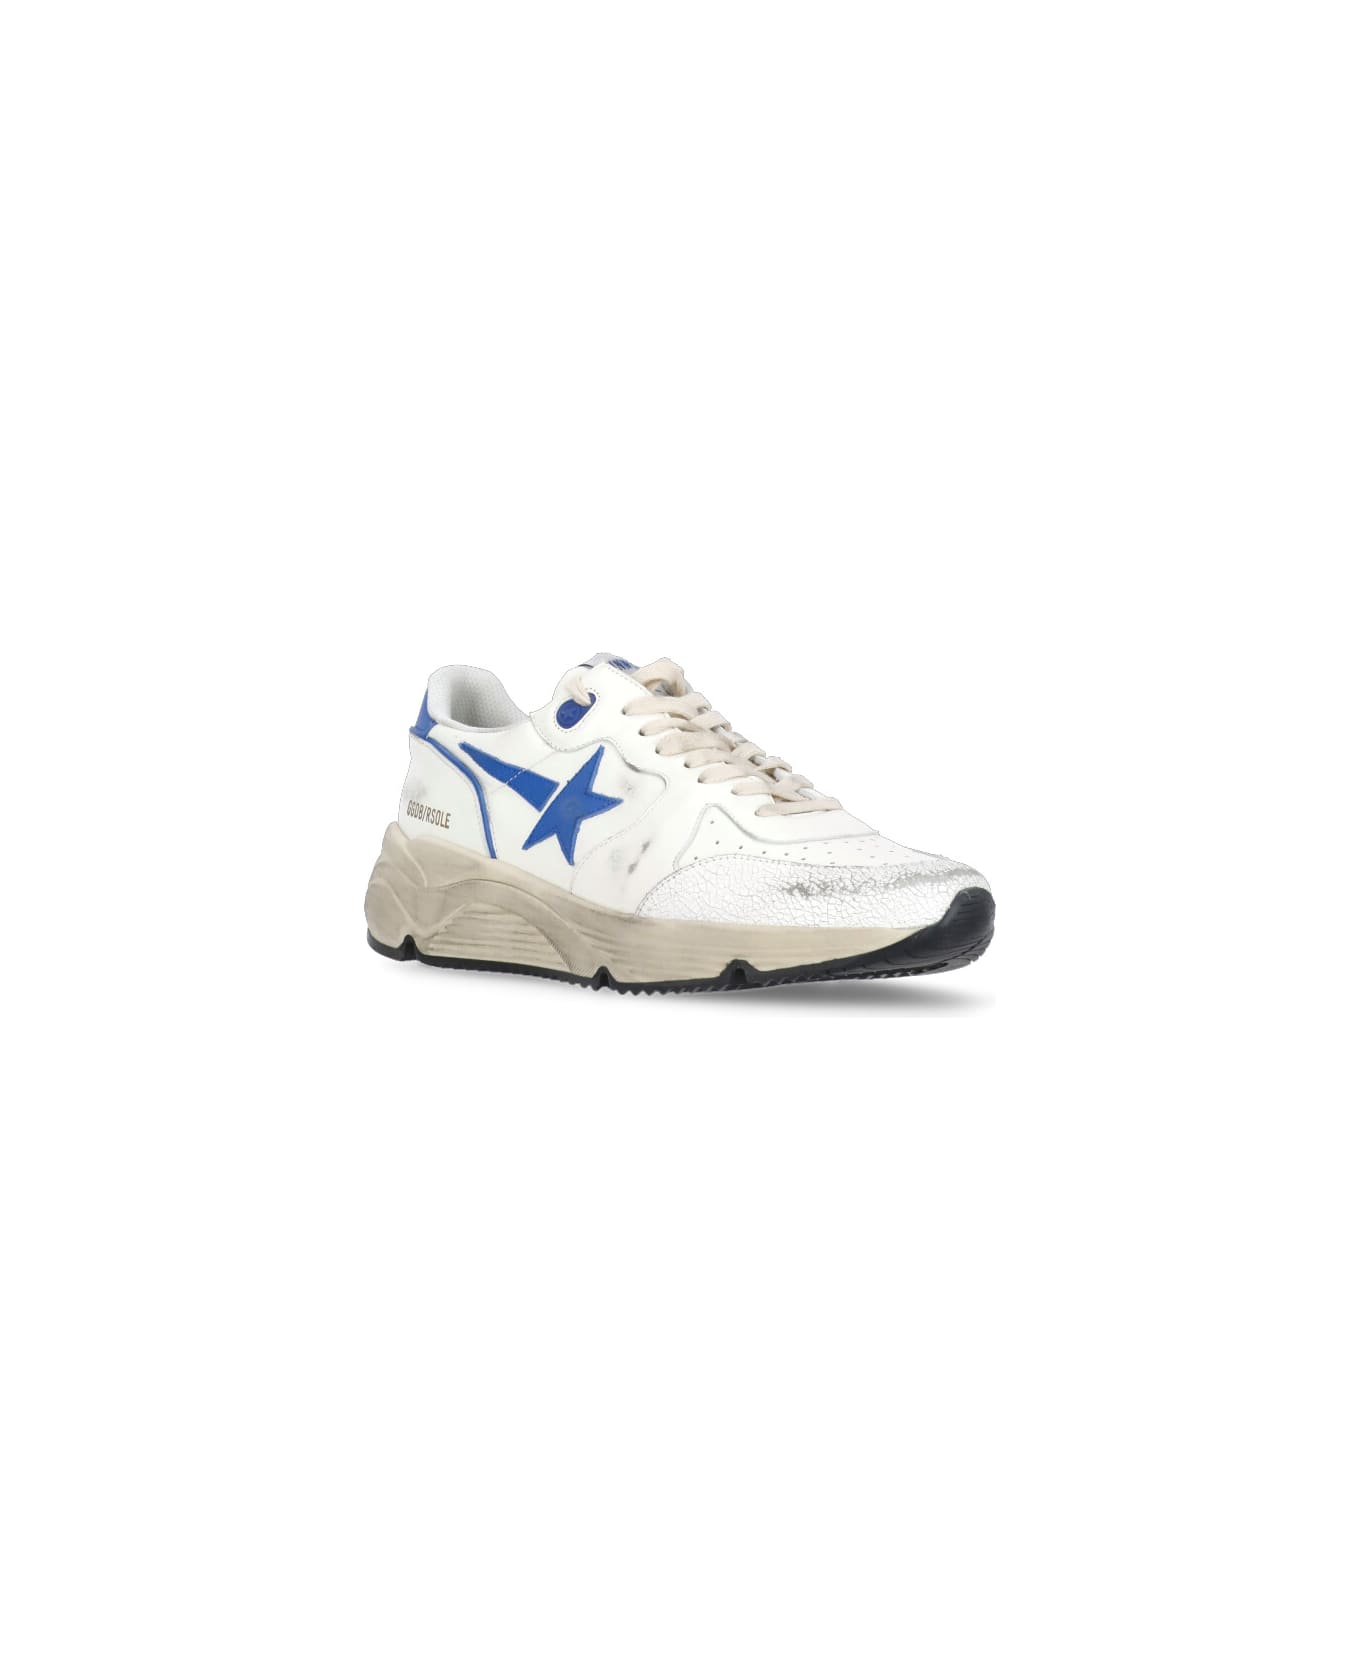 Golden Goose Running Sole Sneakers - White